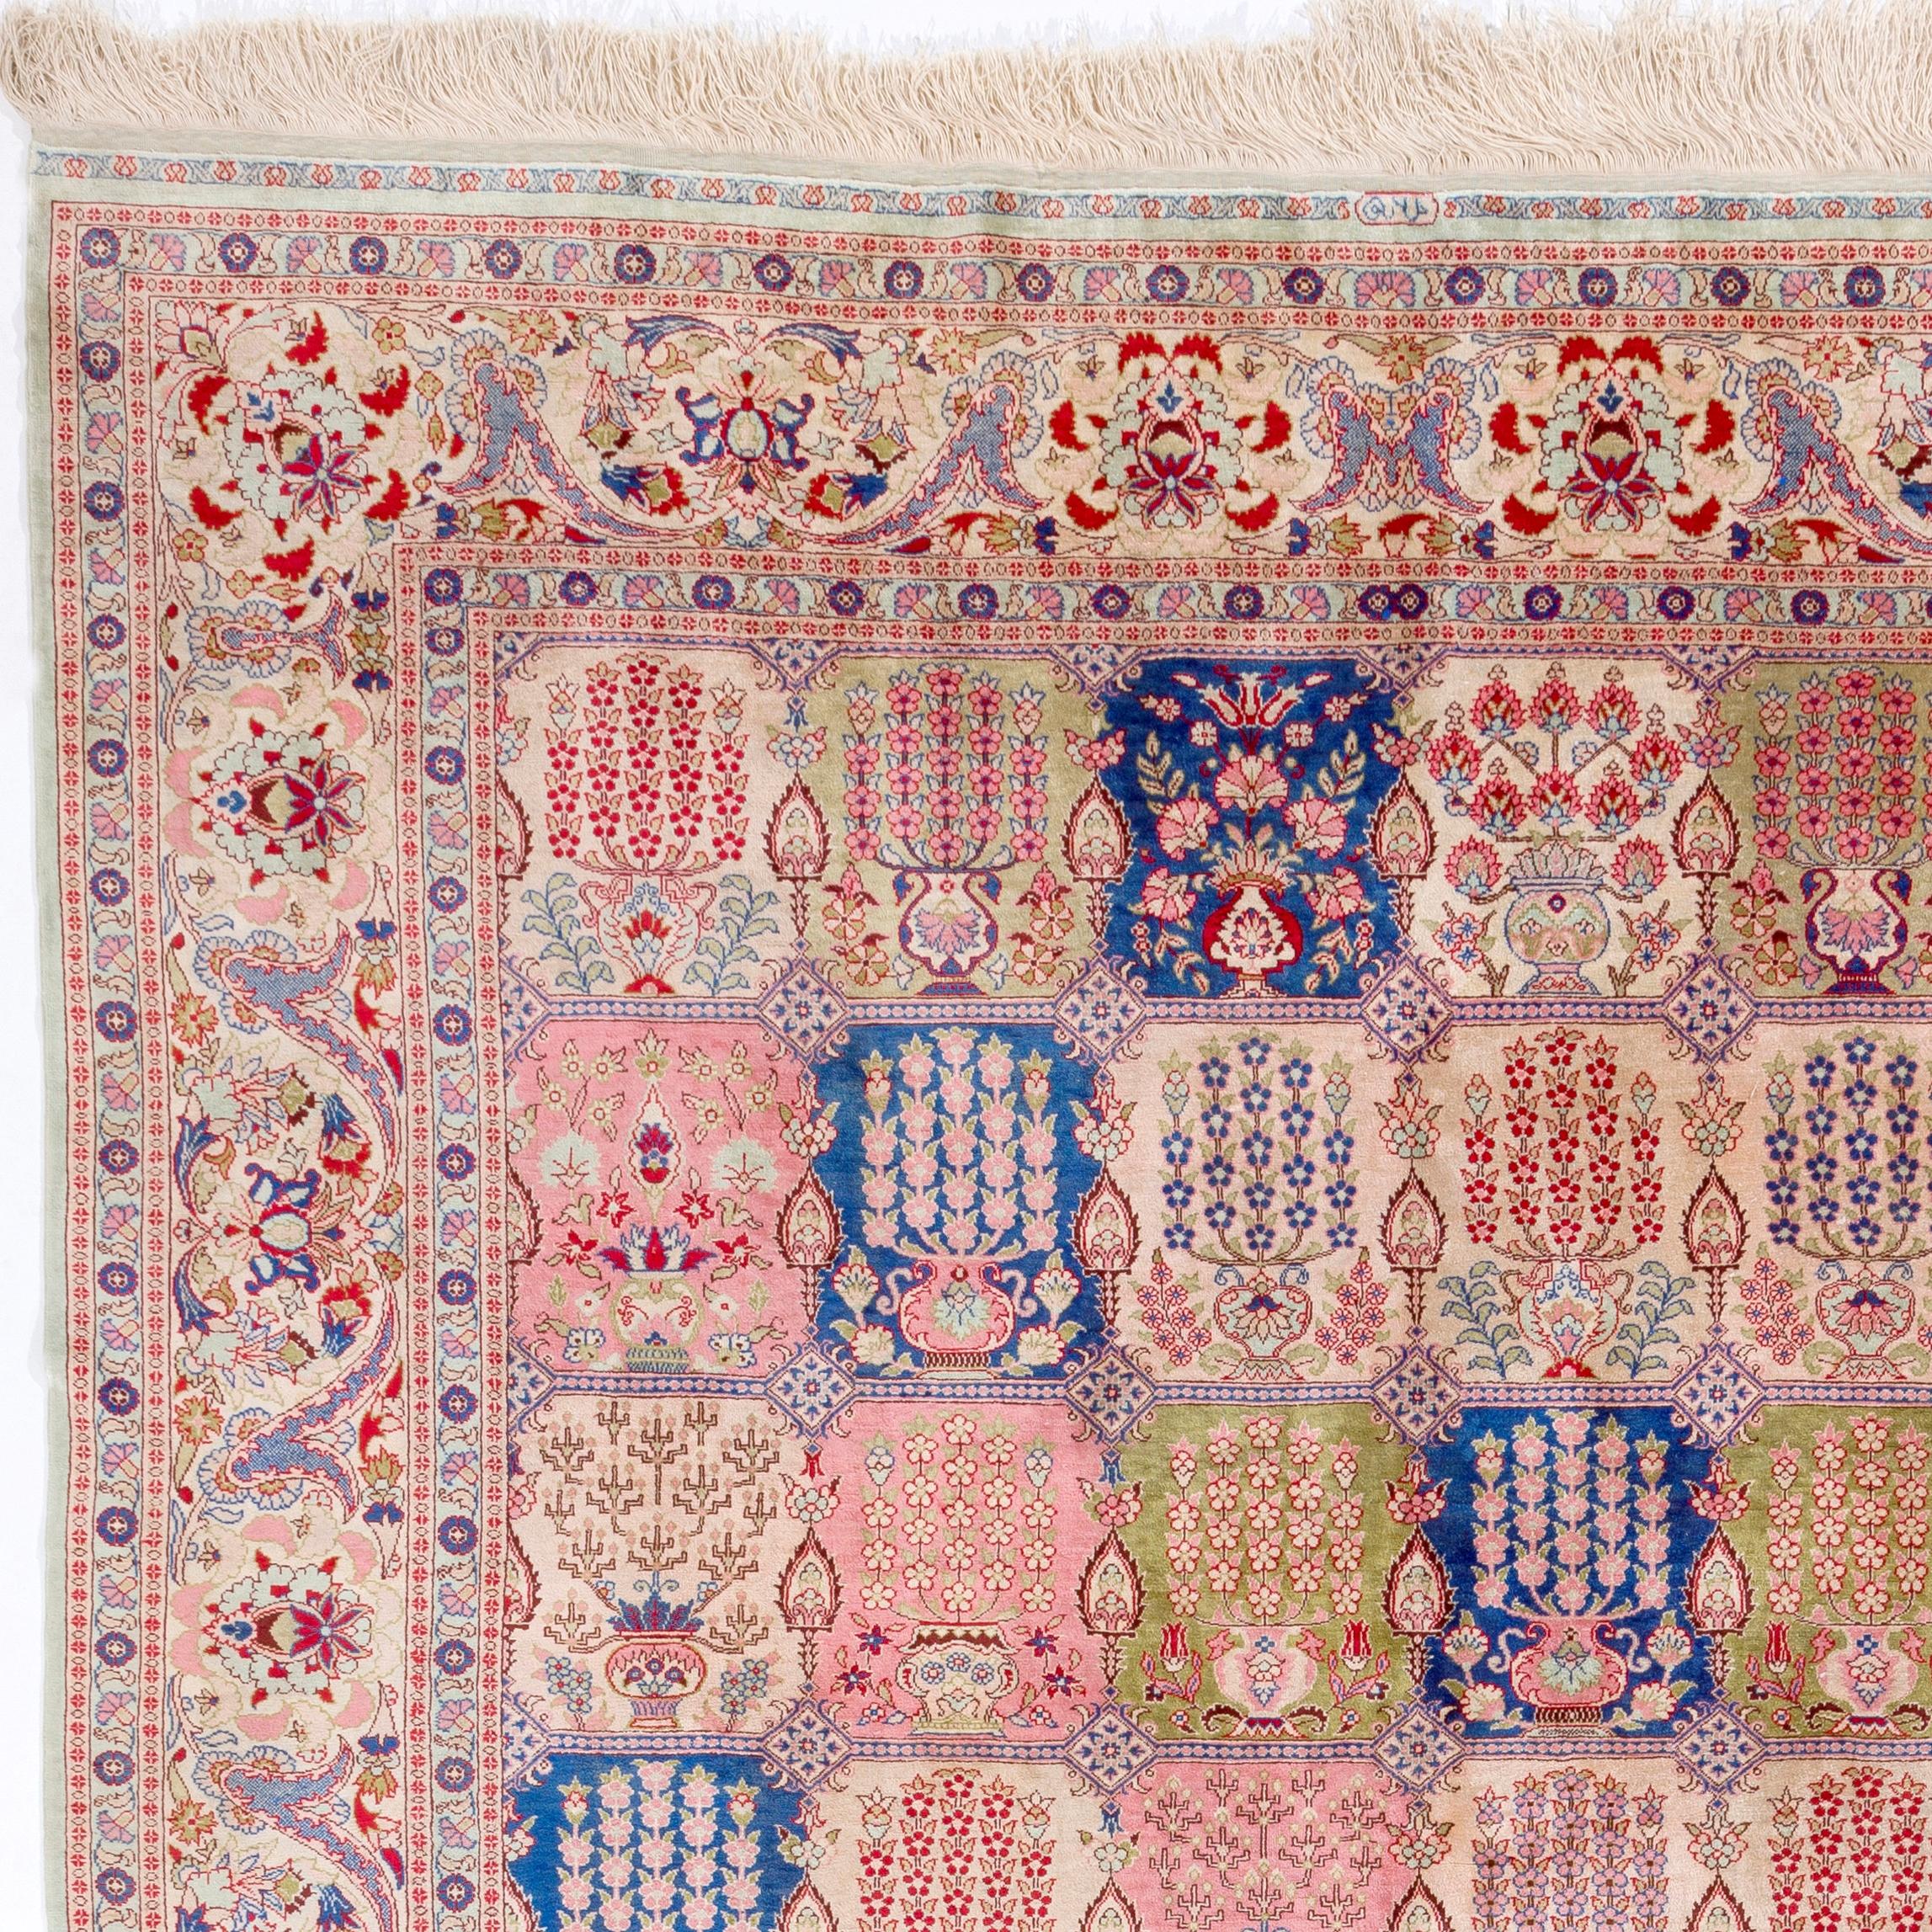 An exquisitely elegant silk Hereke rug with what is known as a ‘garden design’, featuring an overall vignette pattern. Each vignette depicts impeccably drawn delicate potted flowers in blossom such as roses, carnations and tulips. Impressive